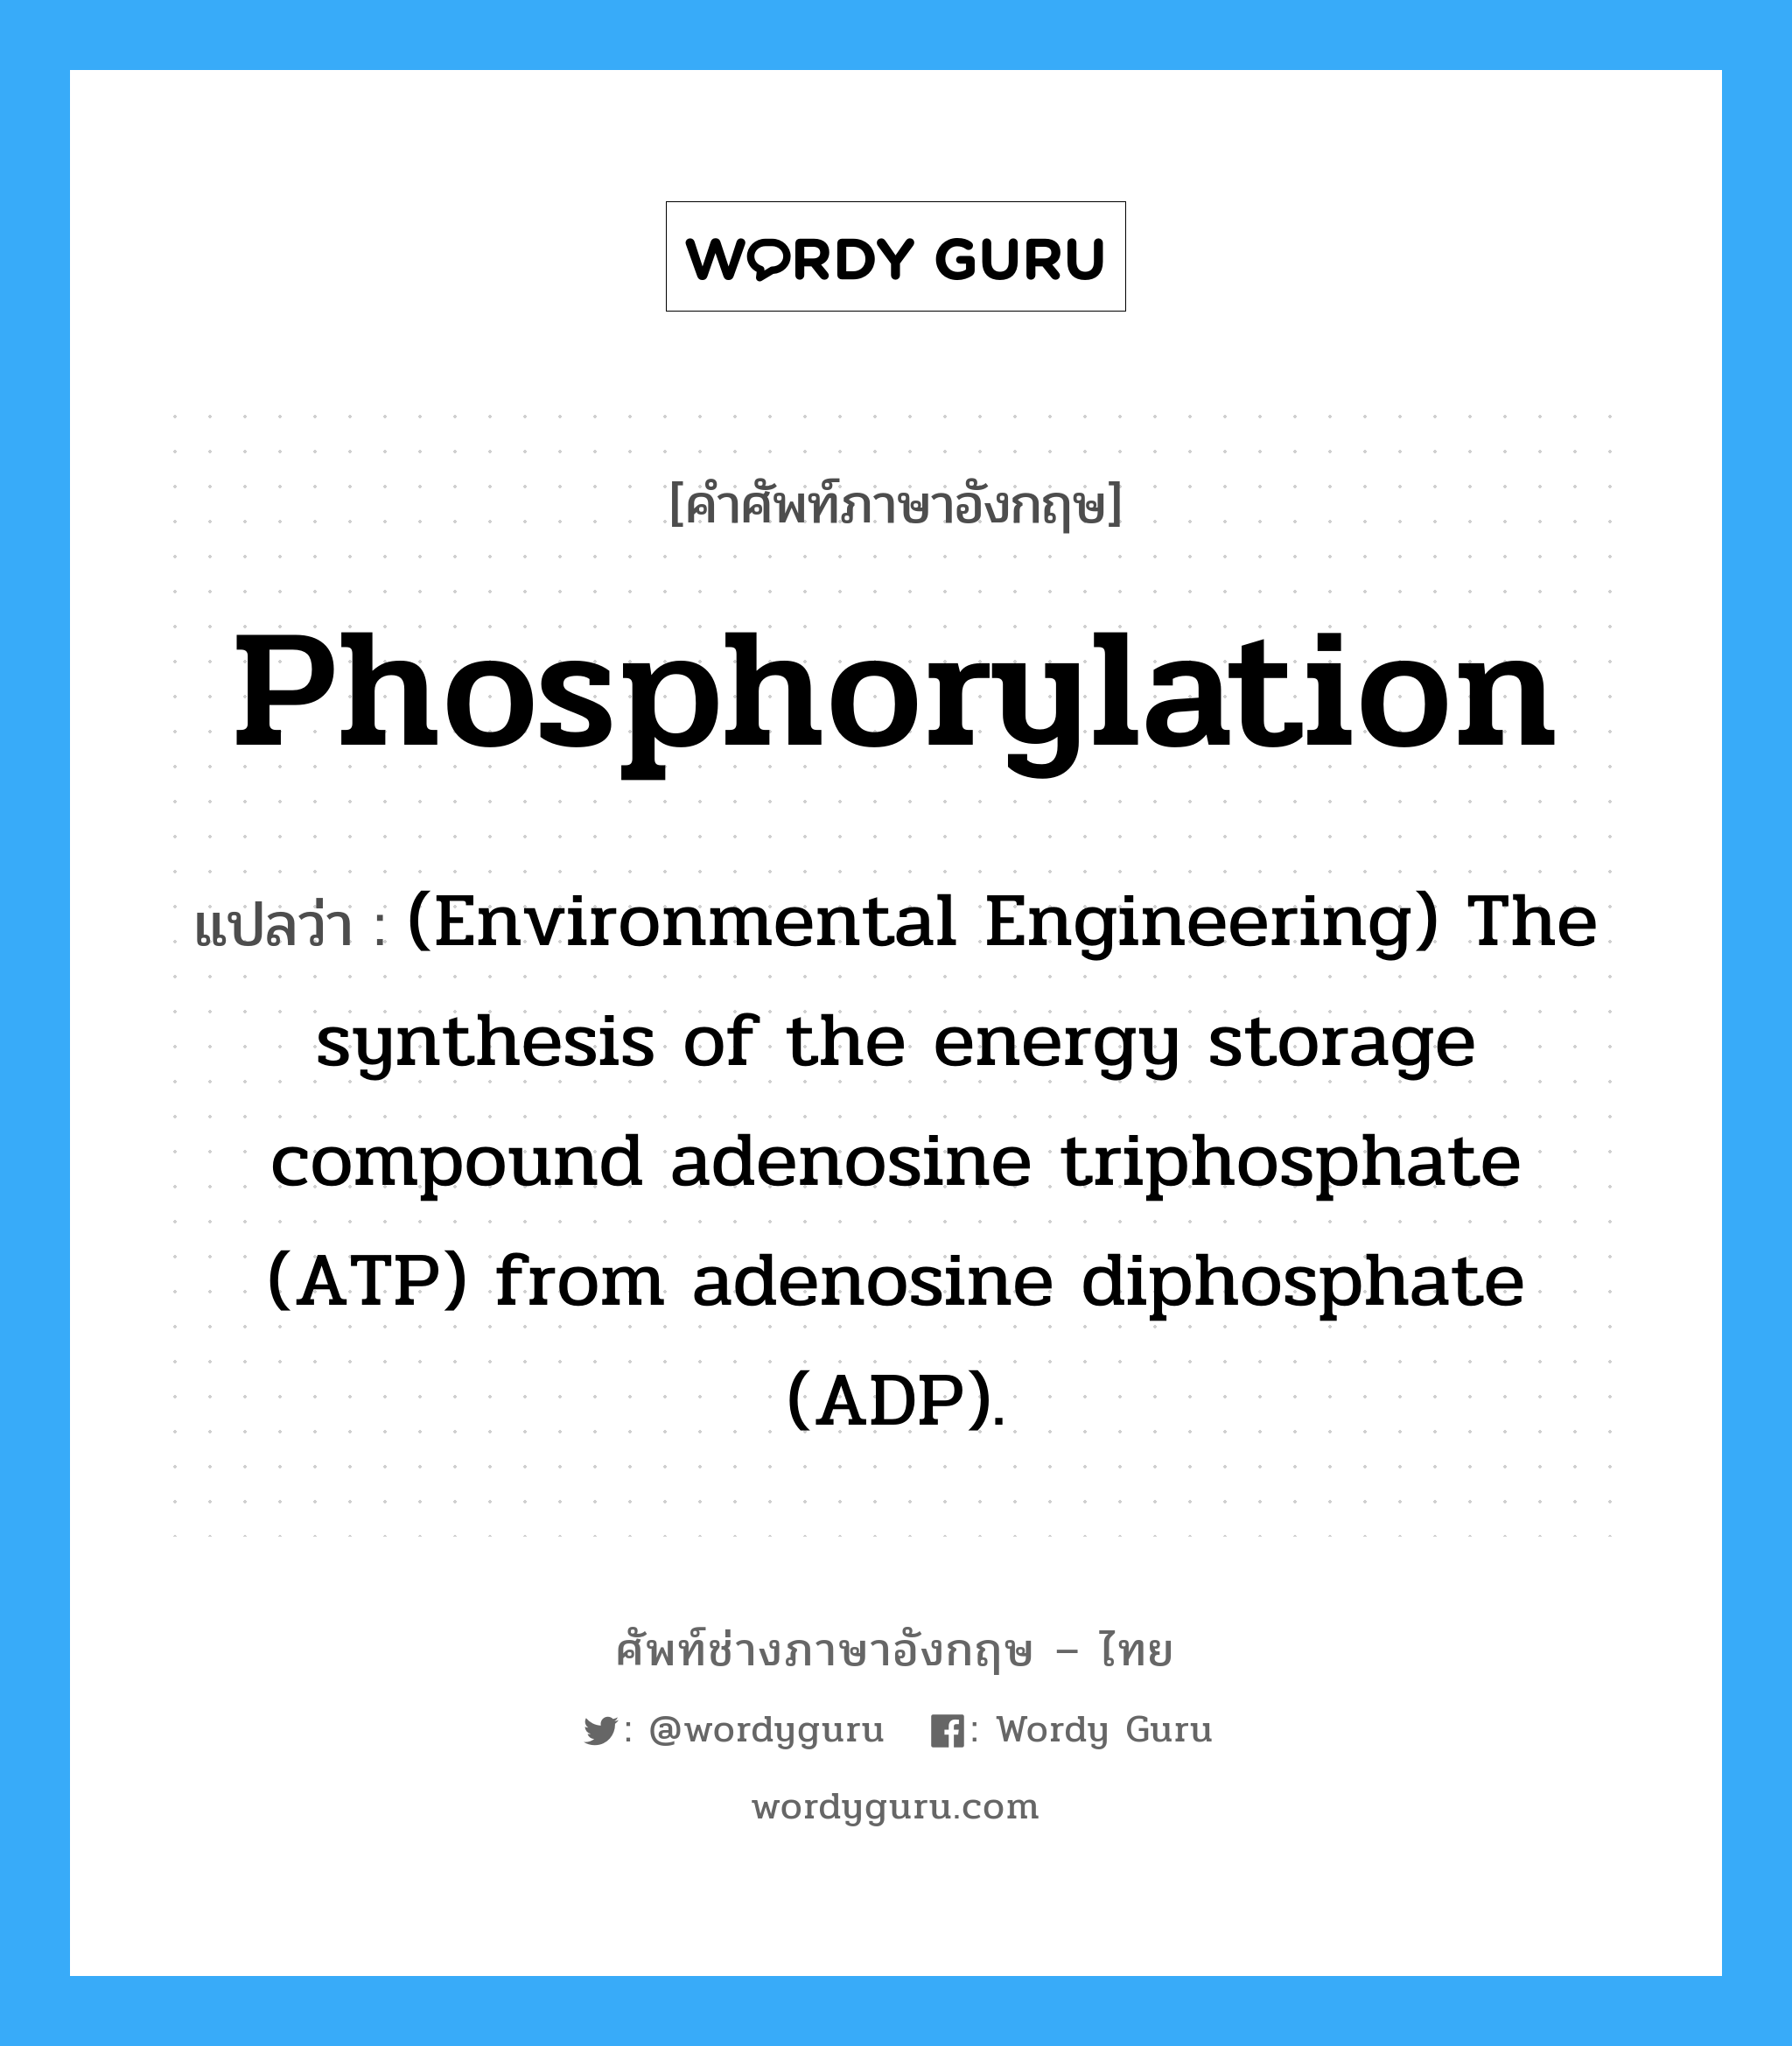 (Environmental Engineering) The synthesis of the energy storage compound adenosine triphosphate (ATP) from adenosine diphosphate (ADP) using a chemical substrate and molecular oxygen. ภาษาอังกฤษ?, คำศัพท์ช่างภาษาอังกฤษ - ไทย (Environmental Engineering) The synthesis of the energy storage compound adenosine triphosphate (ATP) from adenosine diphosphate (ADP). คำศัพท์ภาษาอังกฤษ (Environmental Engineering) The synthesis of the energy storage compound adenosine triphosphate (ATP) from adenosine diphosphate (ADP). แปลว่า Phosphorylation